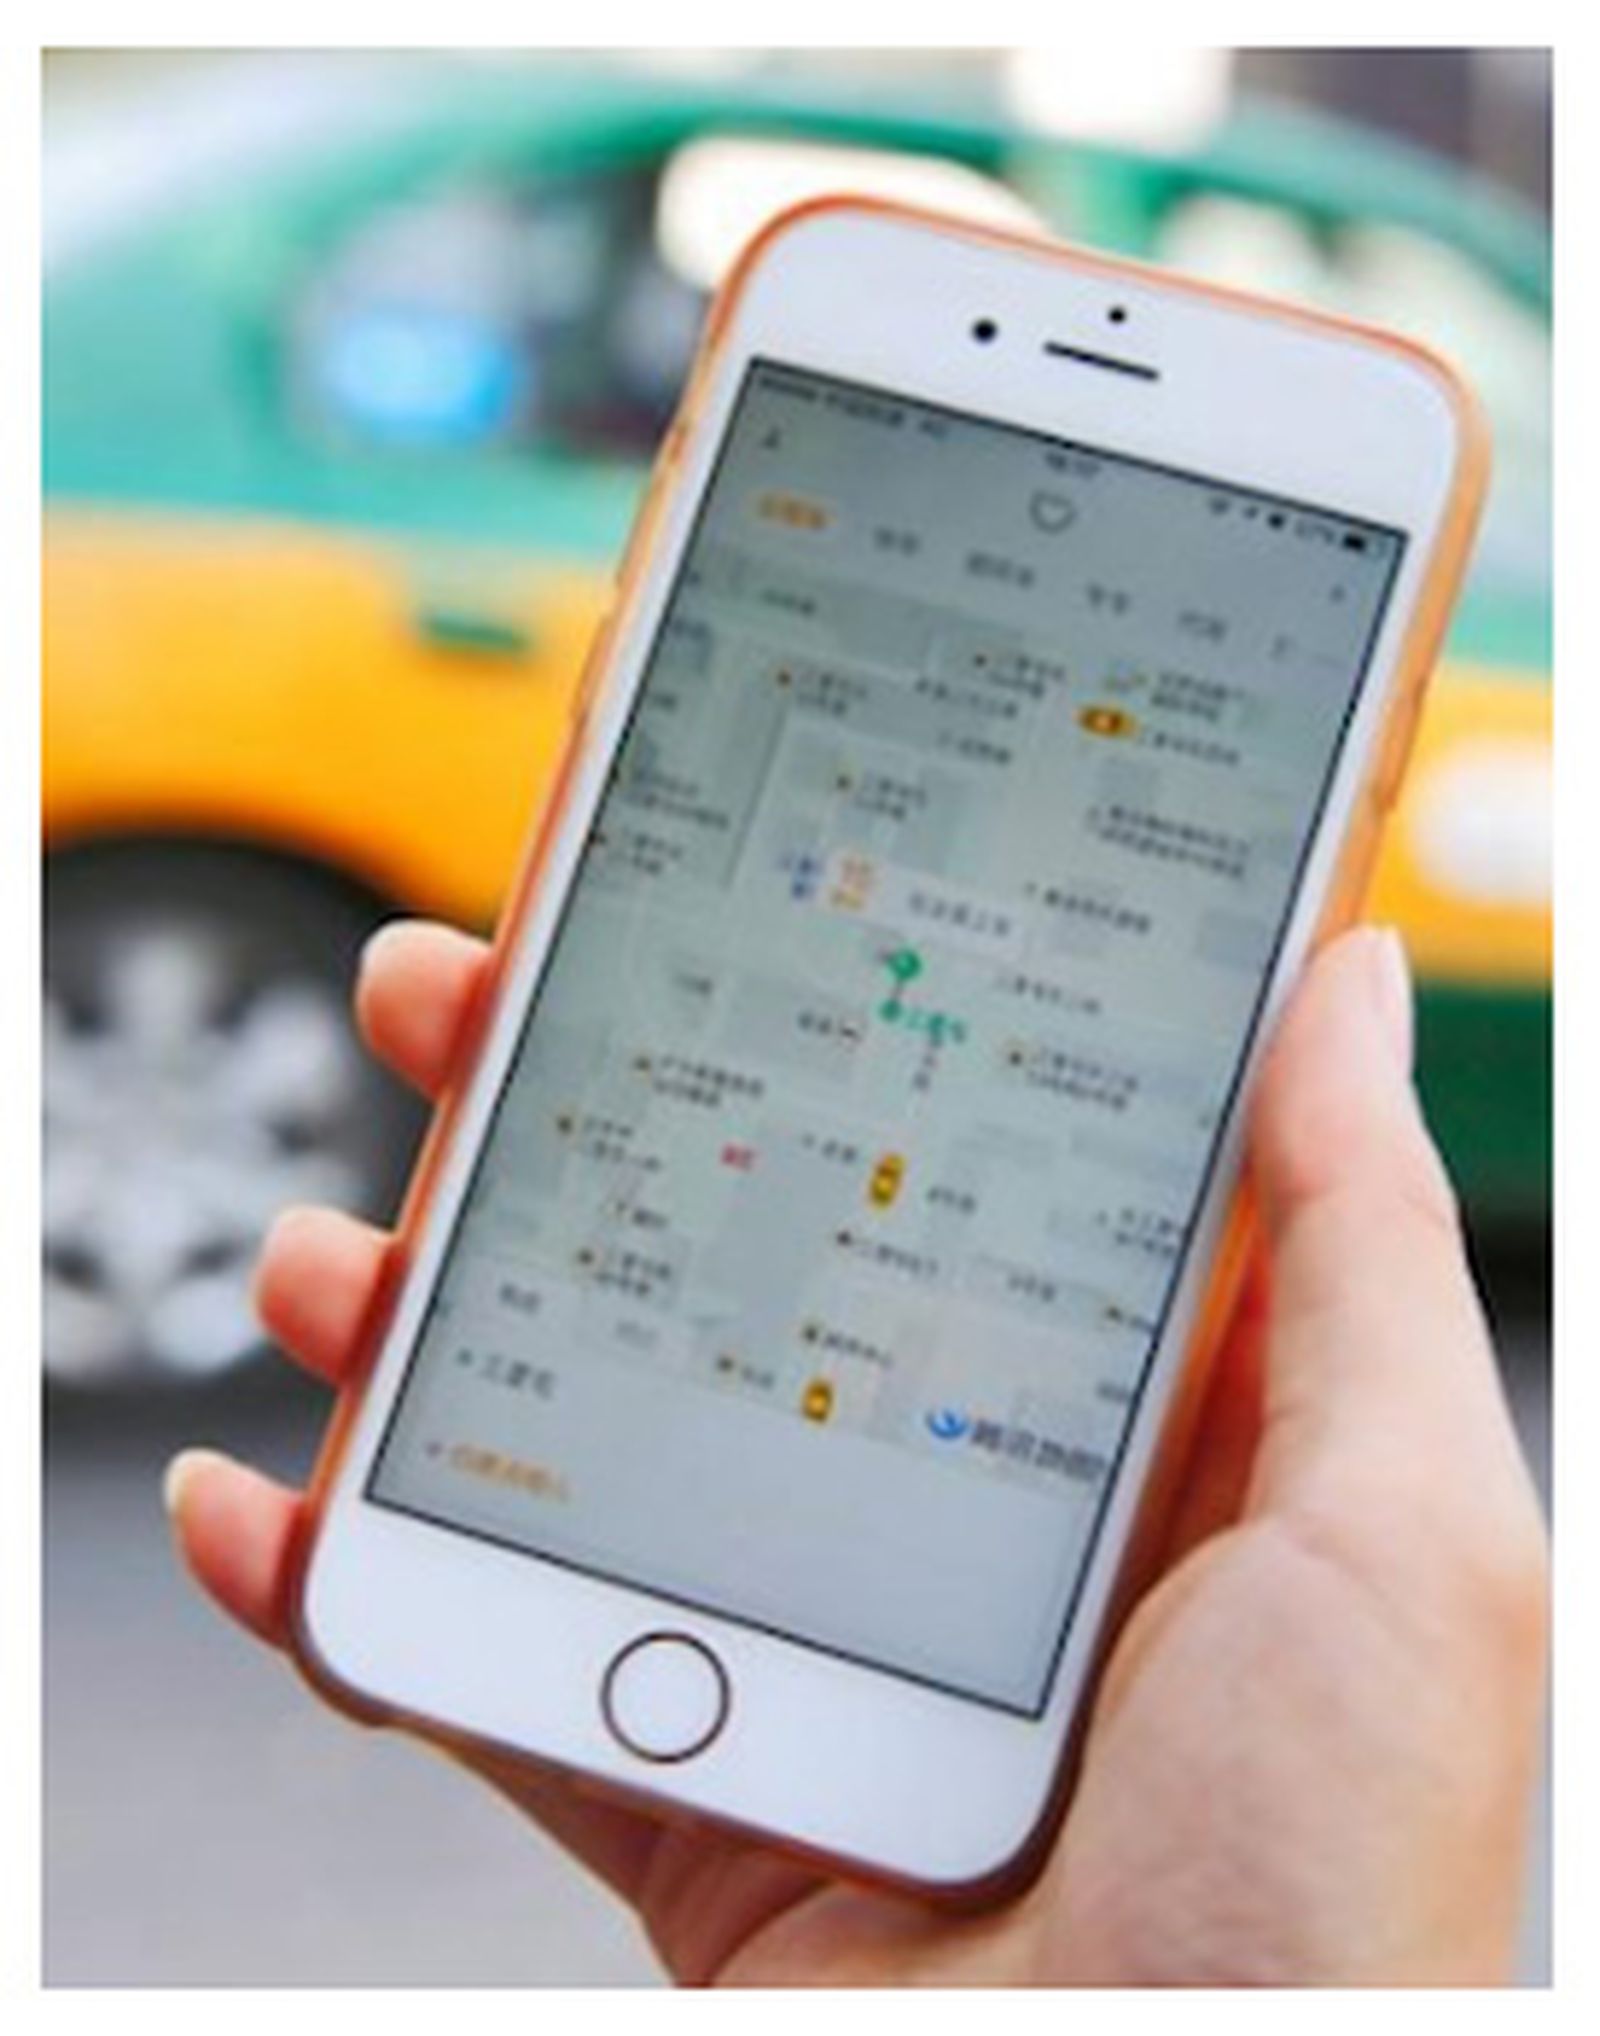 Apple's 1 Billion Investment in Didi Chuxing Aligned With Electric